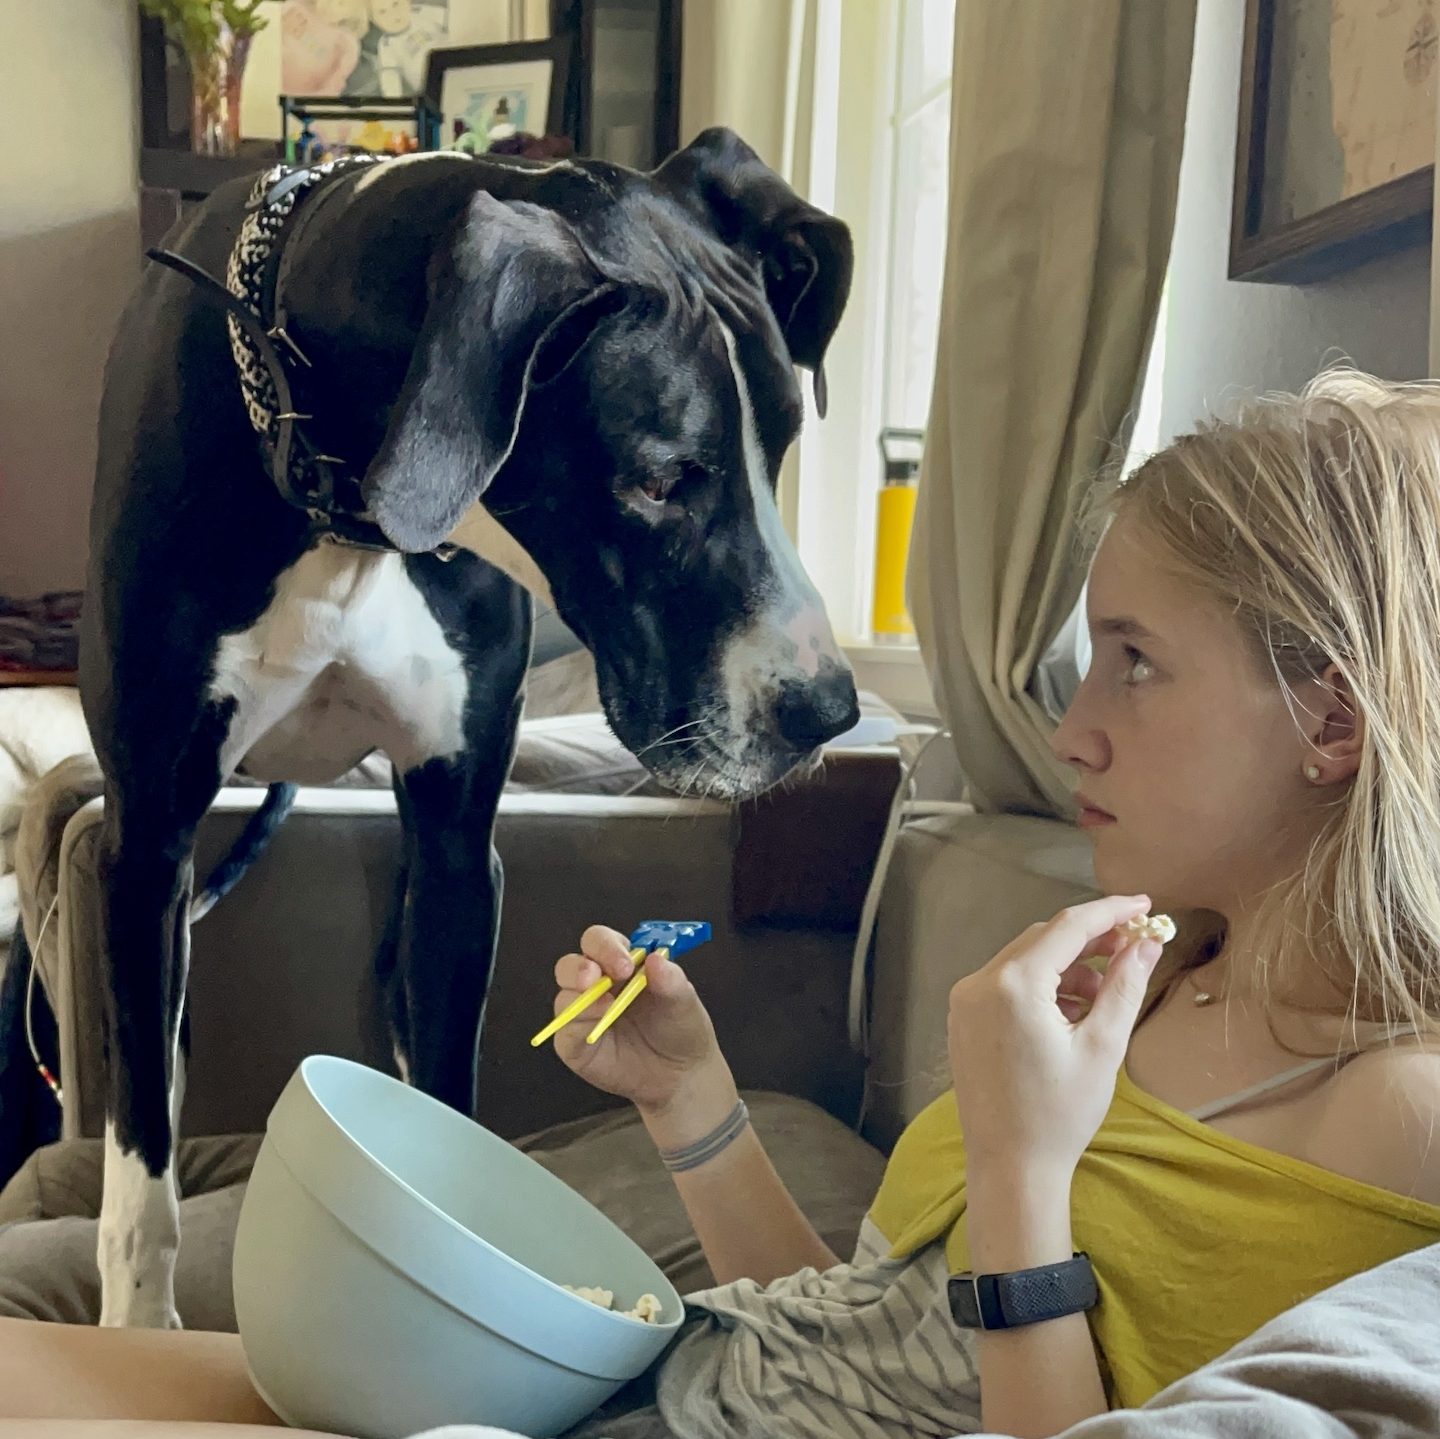 Teenager on a couch eating food with chopsticks while a great dane stares at her